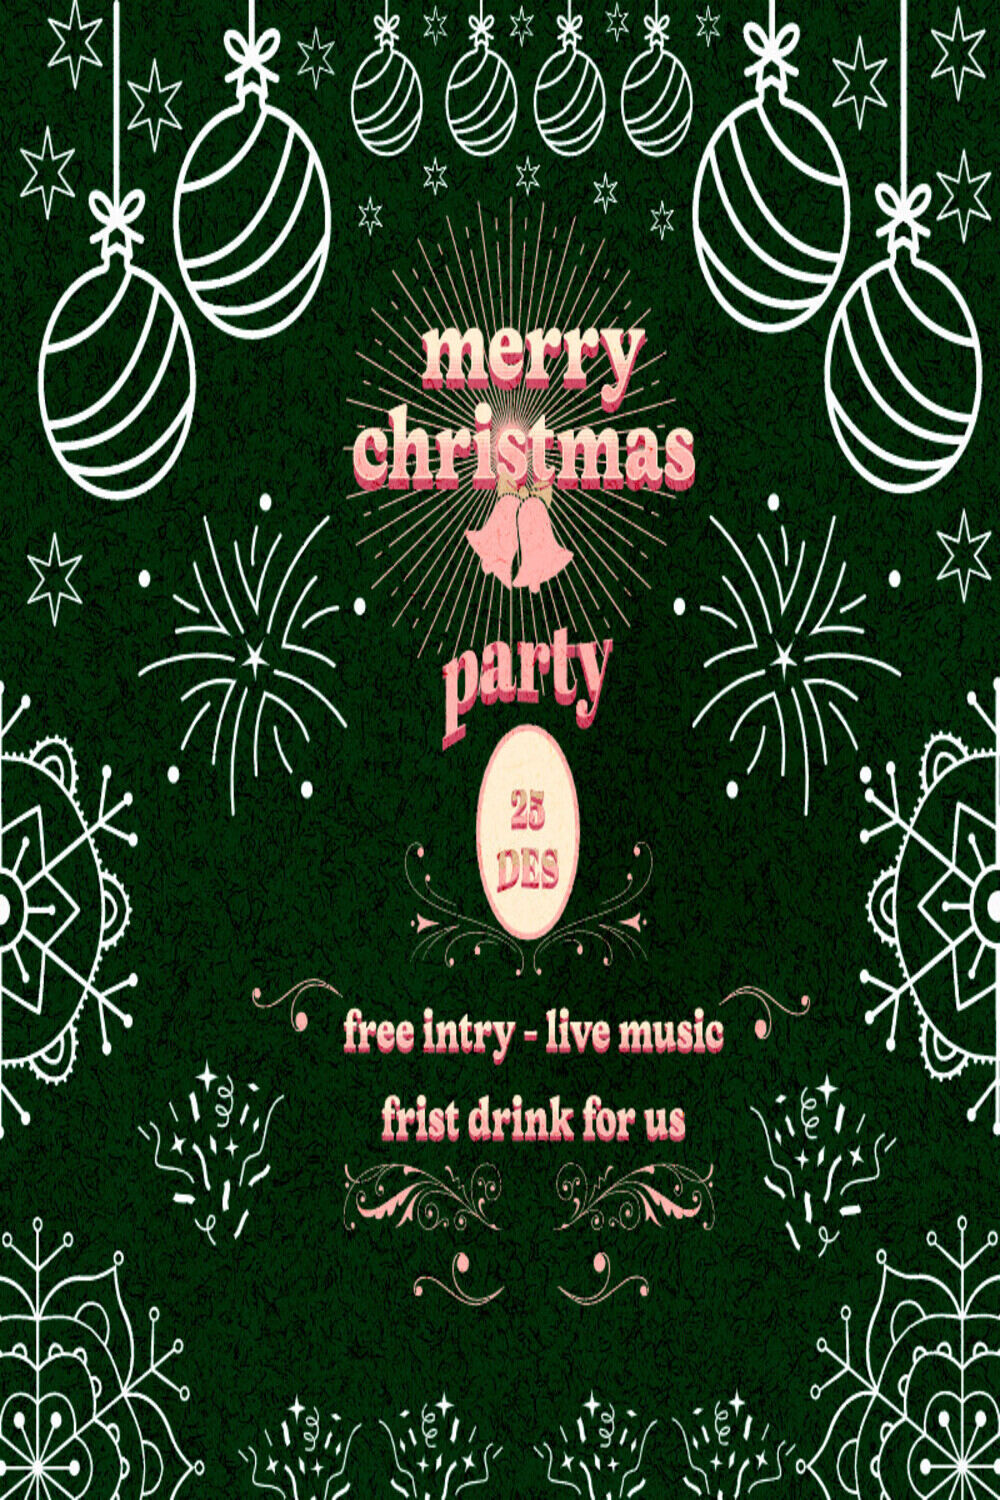 Party Merry Christmas Flyer Design pinterest image.